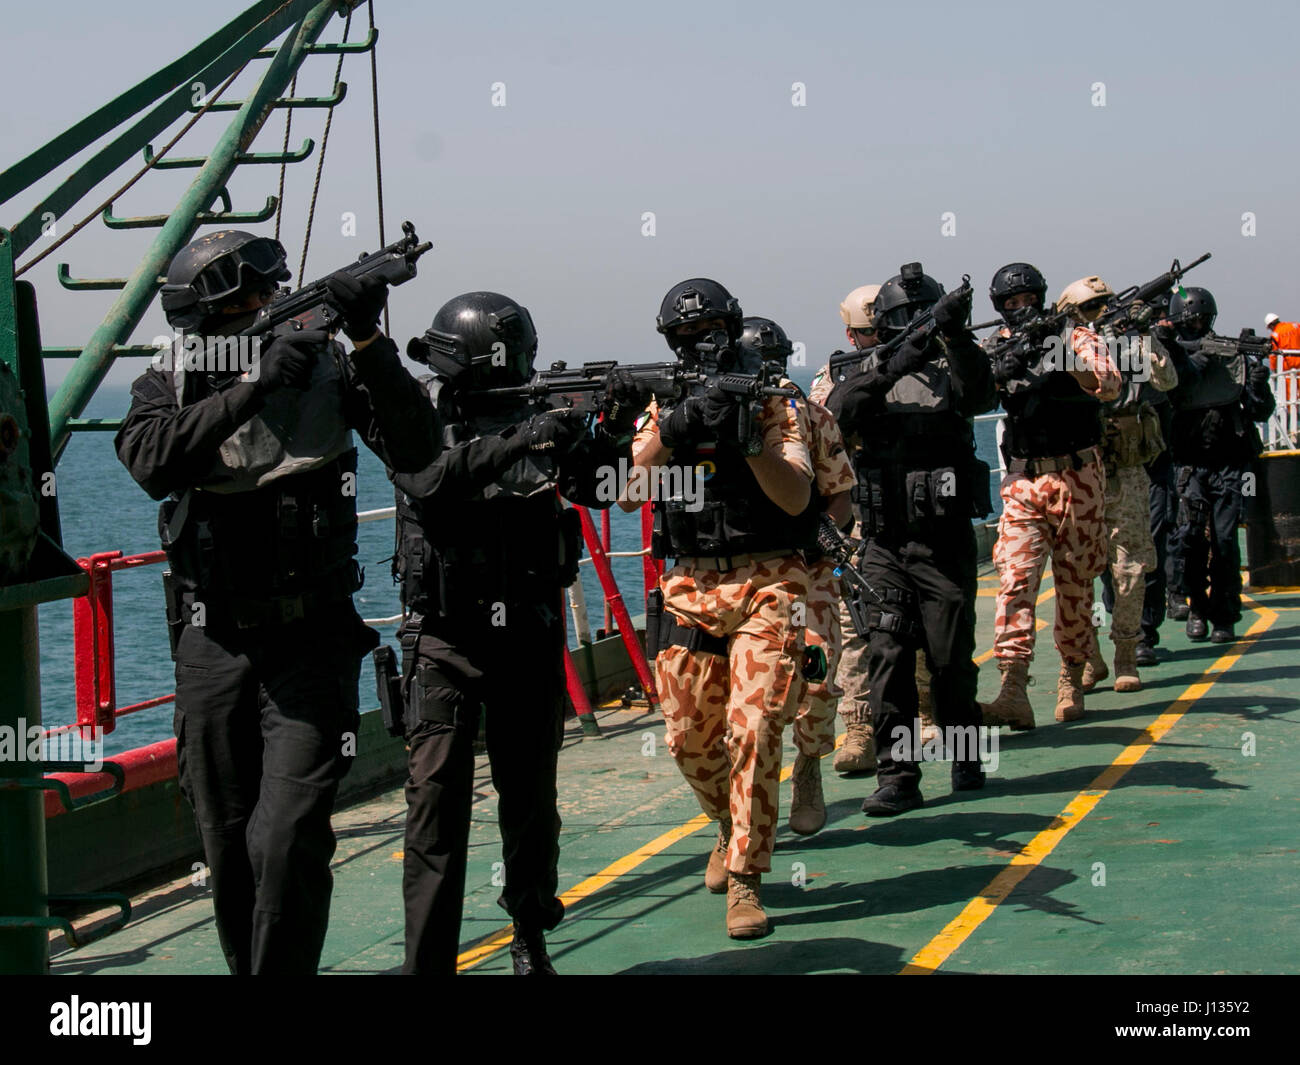 A team of multinational special operations forces searches an oil tanker in the Persian Gulf for  'terrorists' suspected of hijacking the vessel during a training exercise in Kuwait. Soldiers from Company B, 3rd Battalion, 8th Cavalry Regiment, 3rd Armored Brigade Combat Team, 1st Cavalry Division played the opposing force for a joint training exercise between U.S. special operations forces and SOF elements from Qatar, Kuwait, Saudi Arabia, and United Arab Emirates. (U.S. Army photo by Staff Sgt. Leah R. Kilpatrick, 3rd Armored Brigade Combat Team Public Affairs Office, 1st Cavalry Division (r Stock Photo